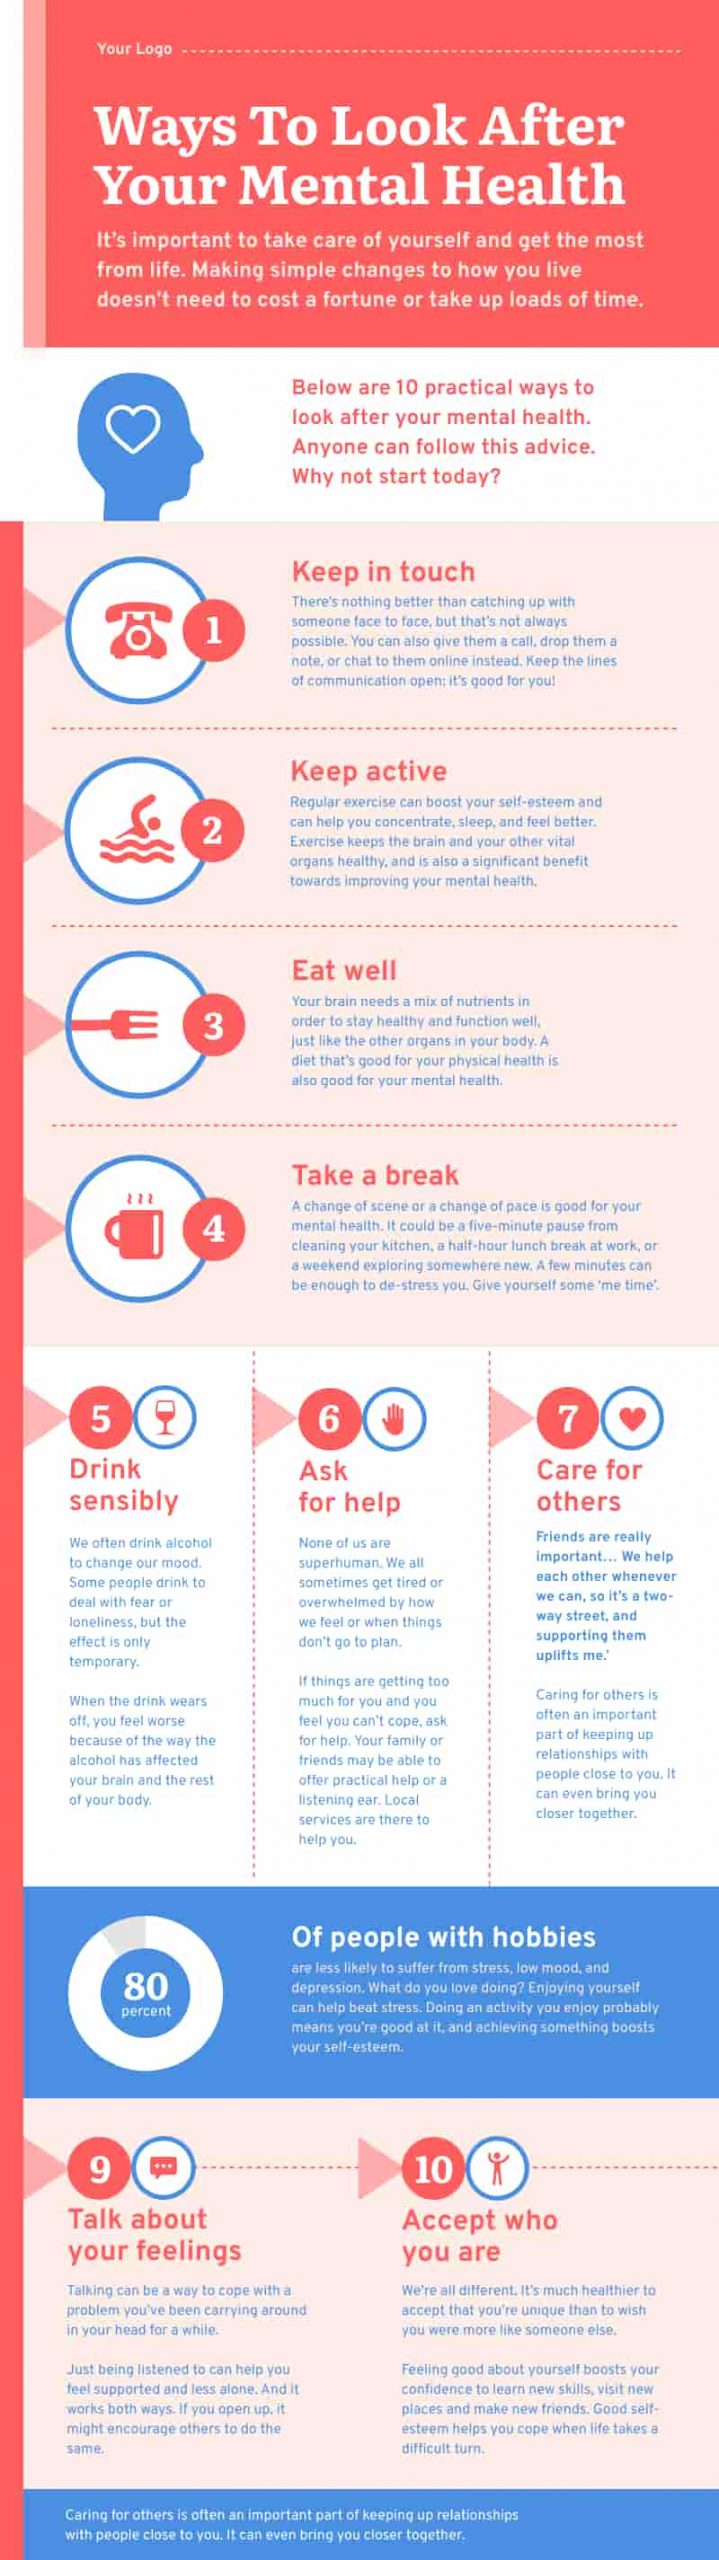 how to look after your mental health infographic template, mental health, mental health infographic